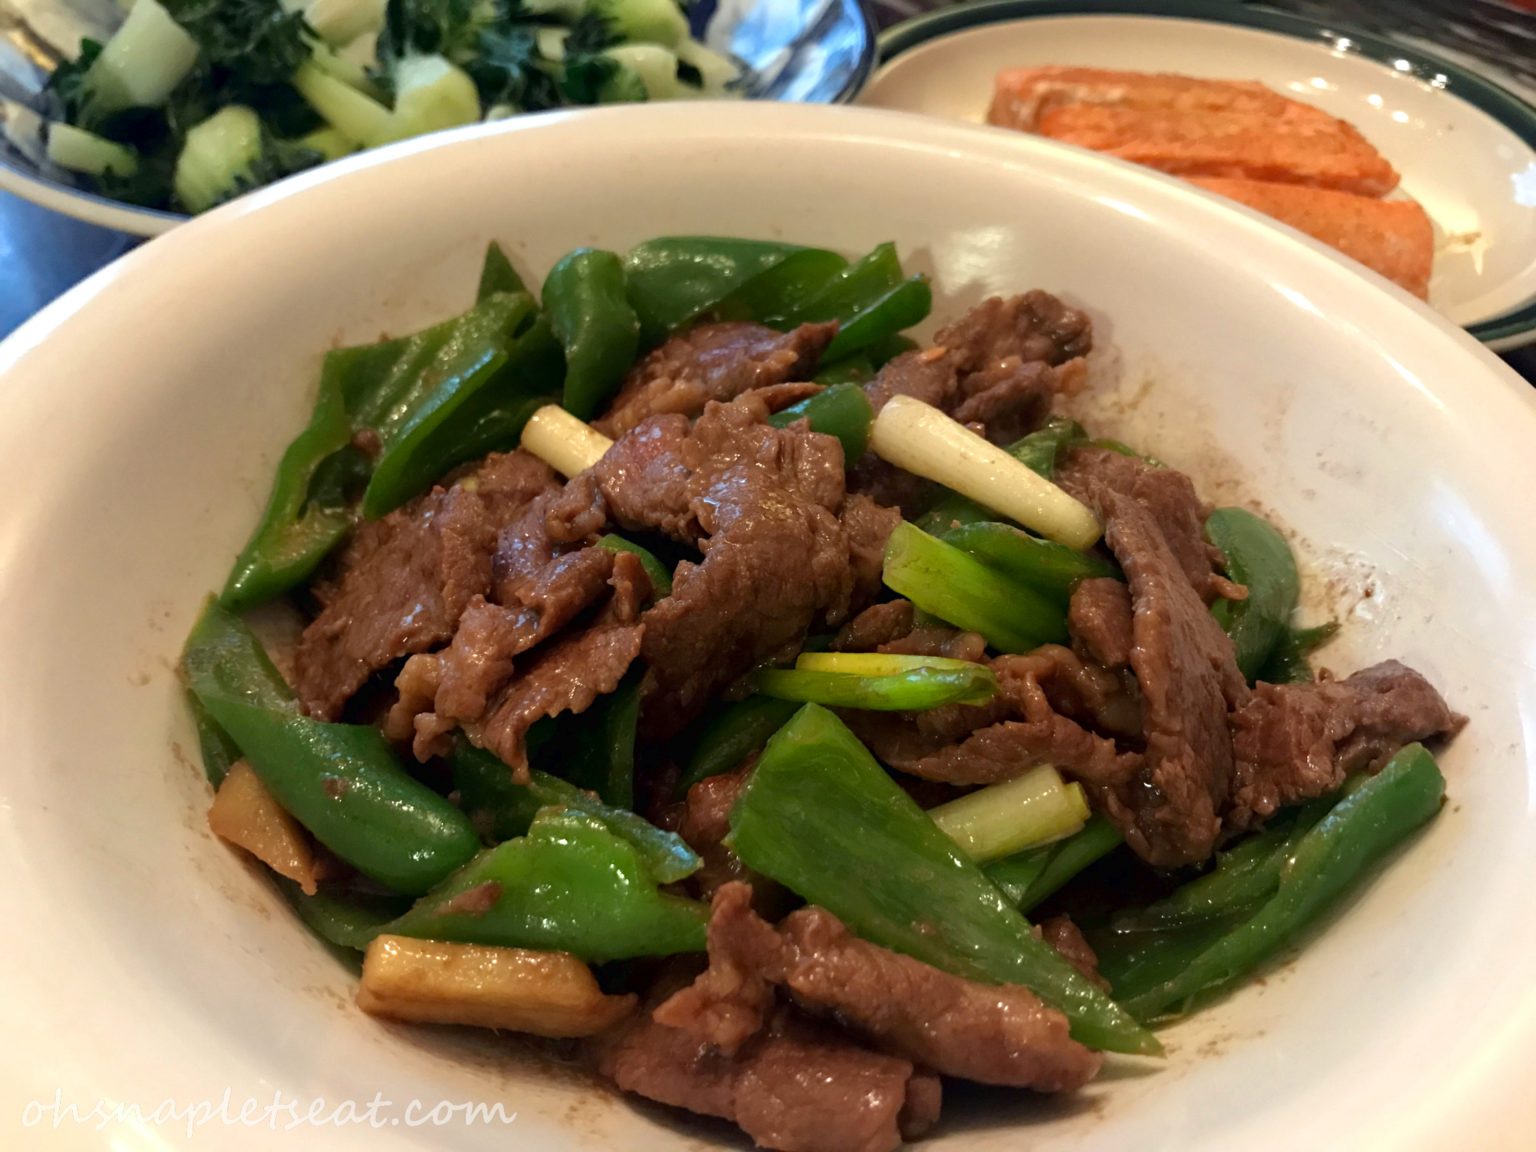 Spicy Pepper Steak - Oh Snap! Let's Eat!